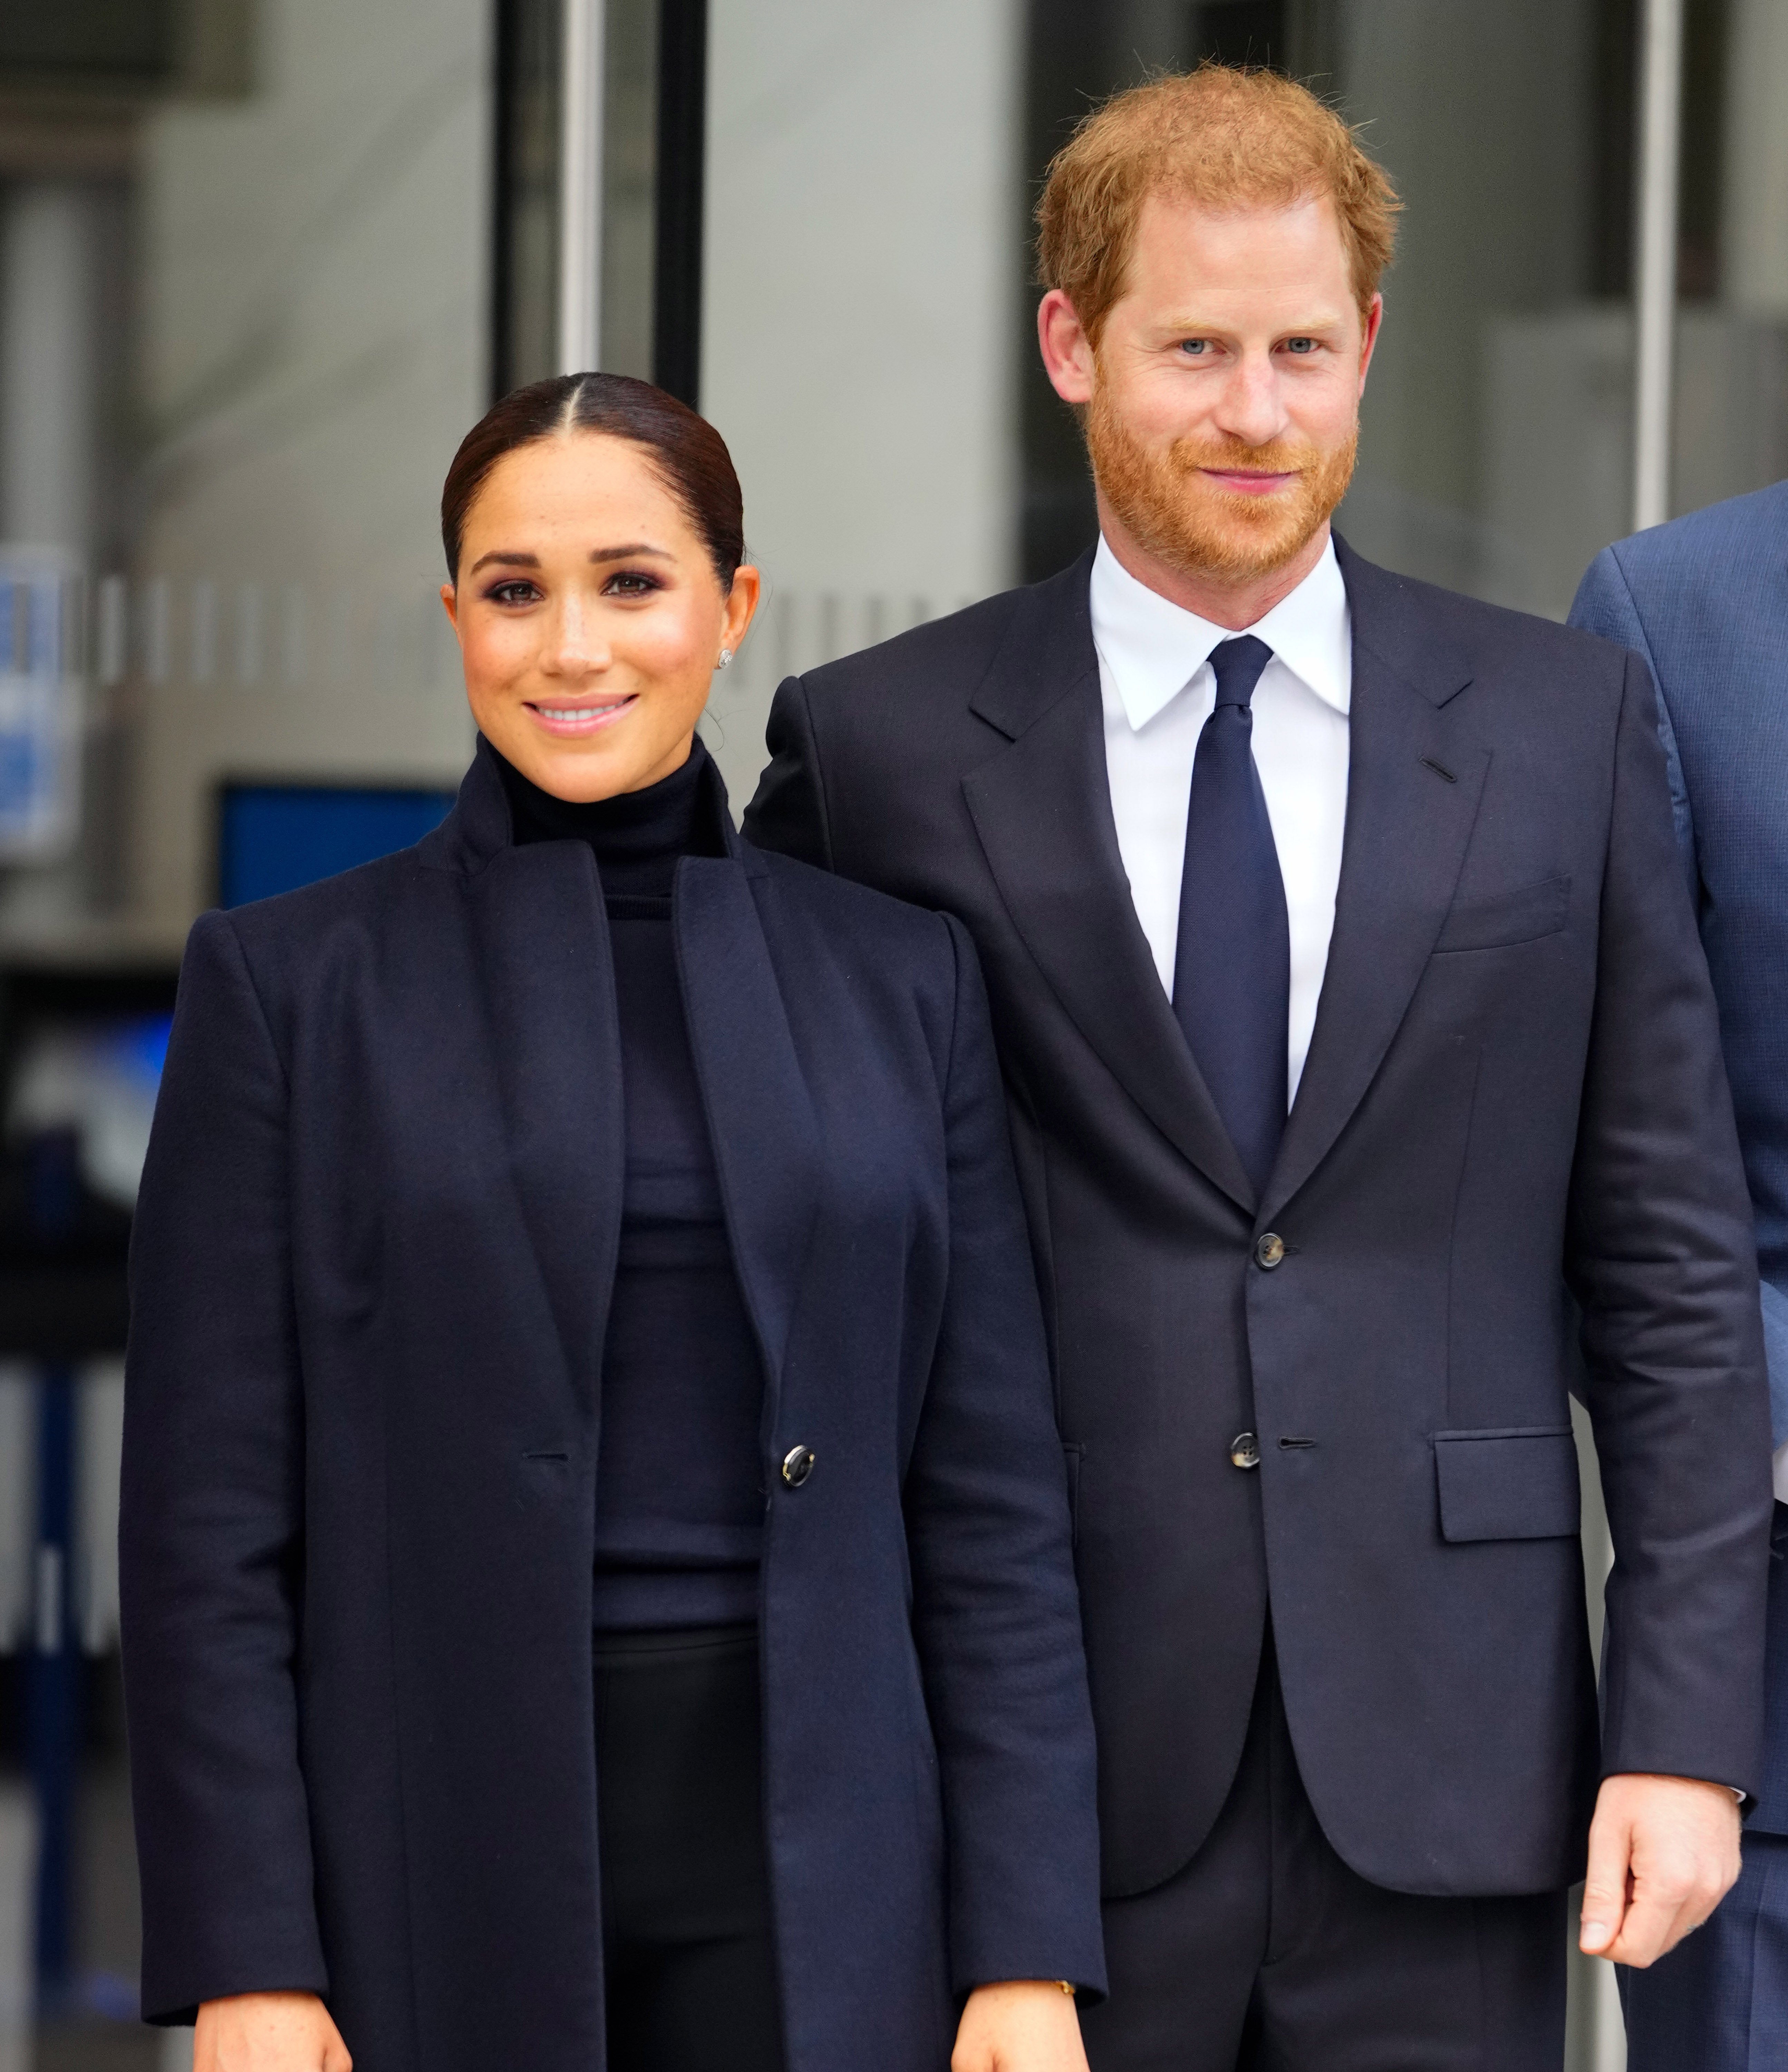 Prince Harry and Meghan Markle visited the One World Observatory as NY Governor Hochul and NYC Mayor Blasio along with them in New York City, United States, on September 23, 2021. | Source: Getty Images